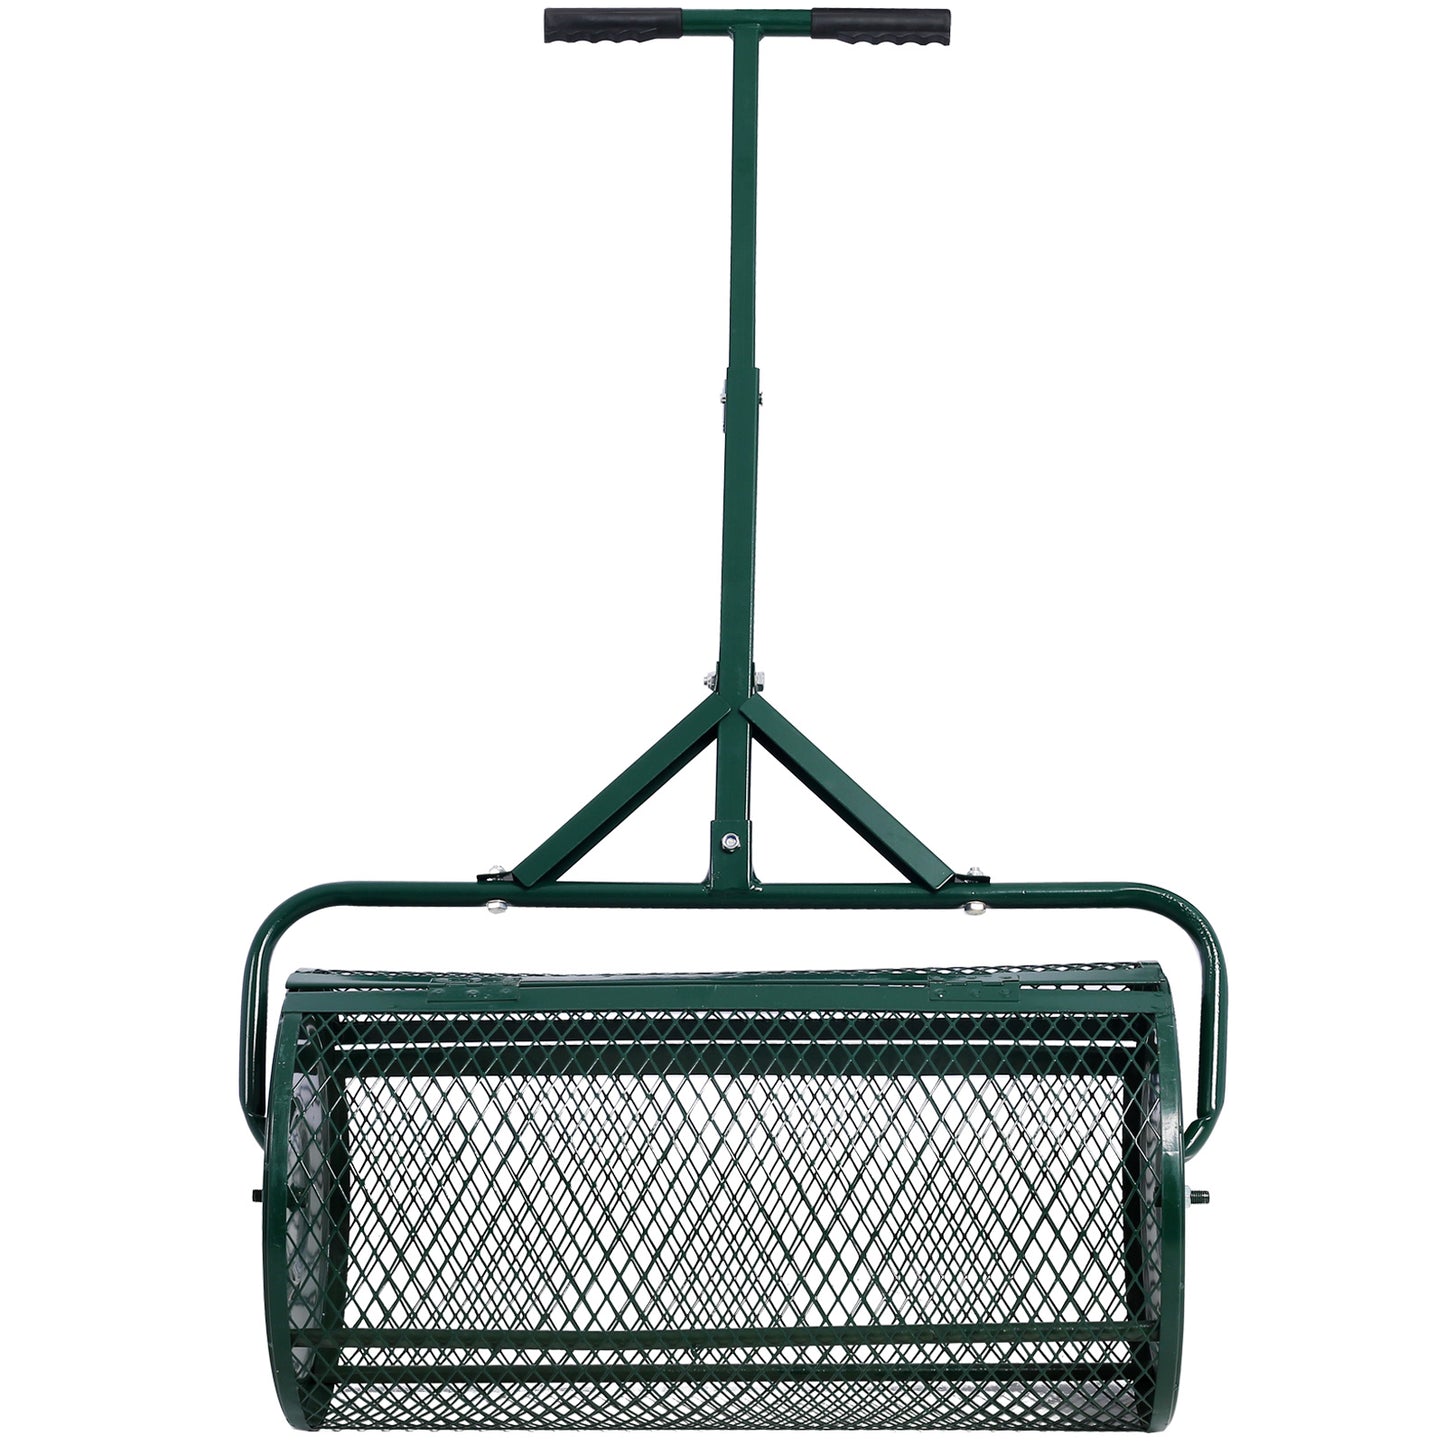 Peat Moss Spreader 24inch,Compost Spreader Metal Mesh,T shaped Handle for planting seeding,Lawn and Garden Care Manure Spreaders Roller